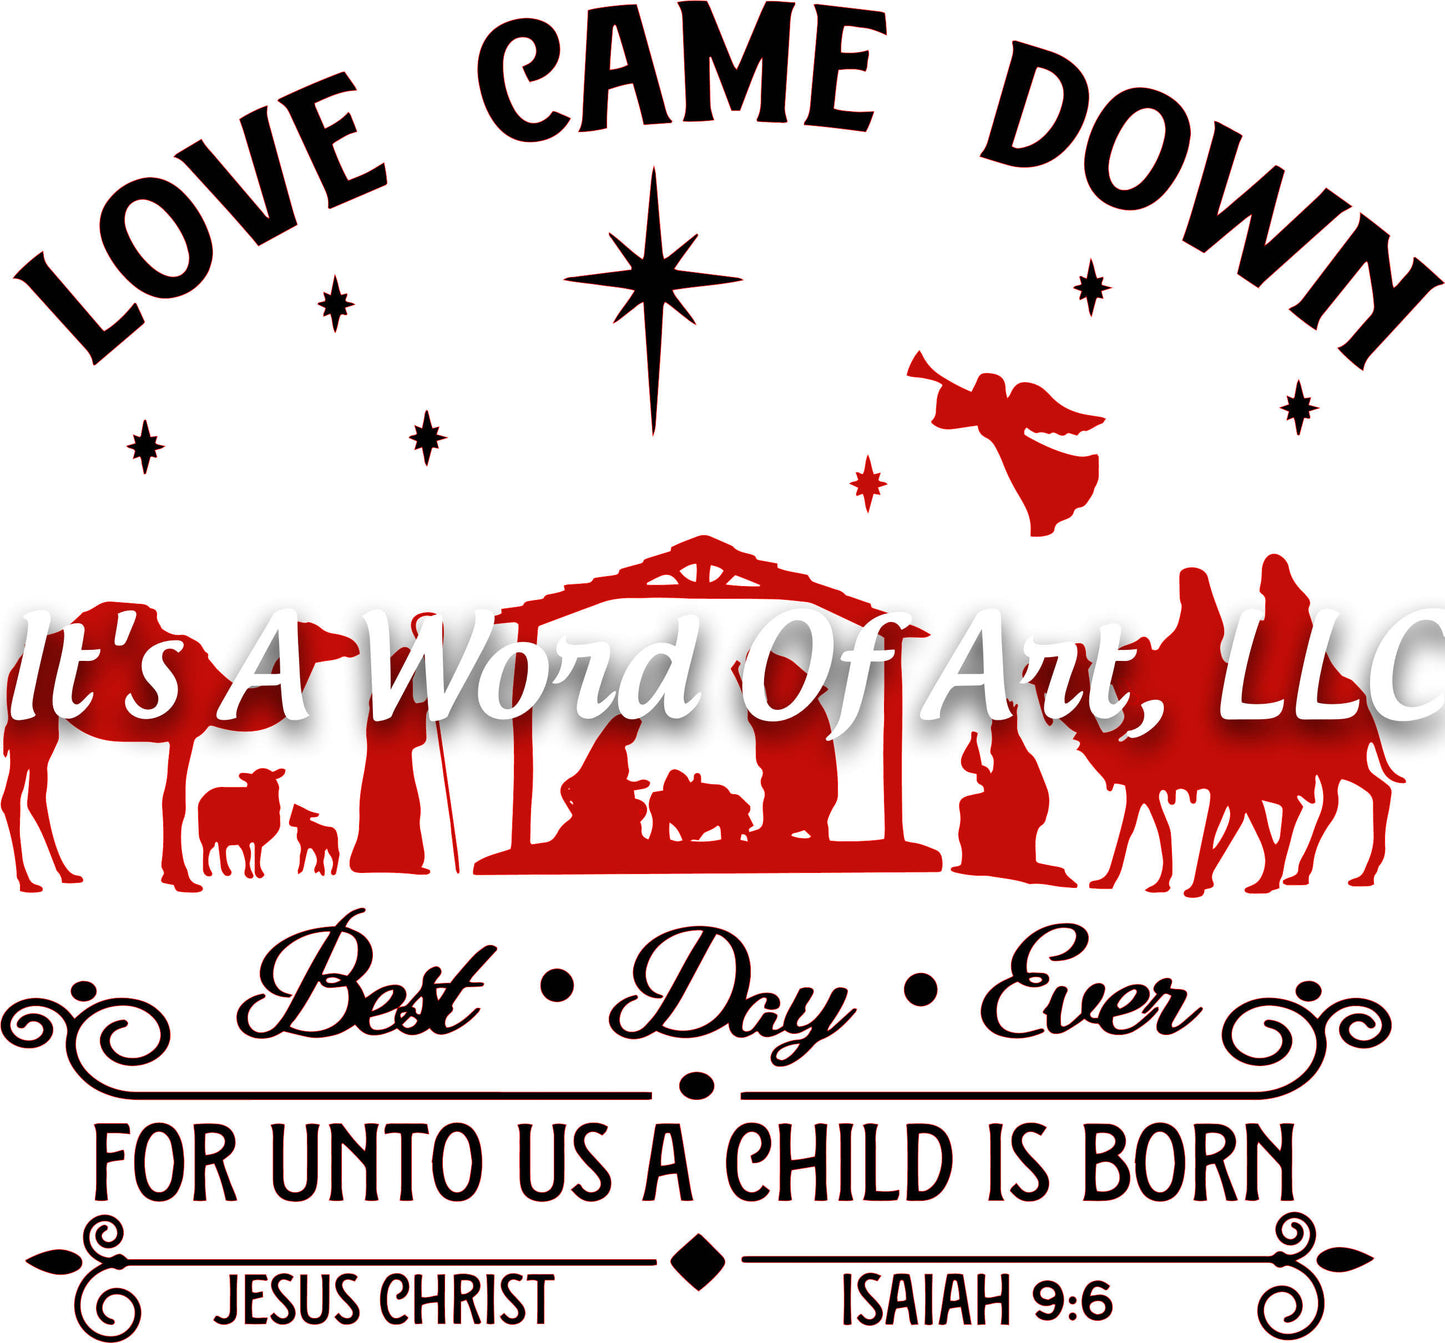 Christmas 307 - Love Came Down for Unto us a Child is Born Manger Scene - Sublimation Transfer Set/Ready To Press Sublimation Transfer